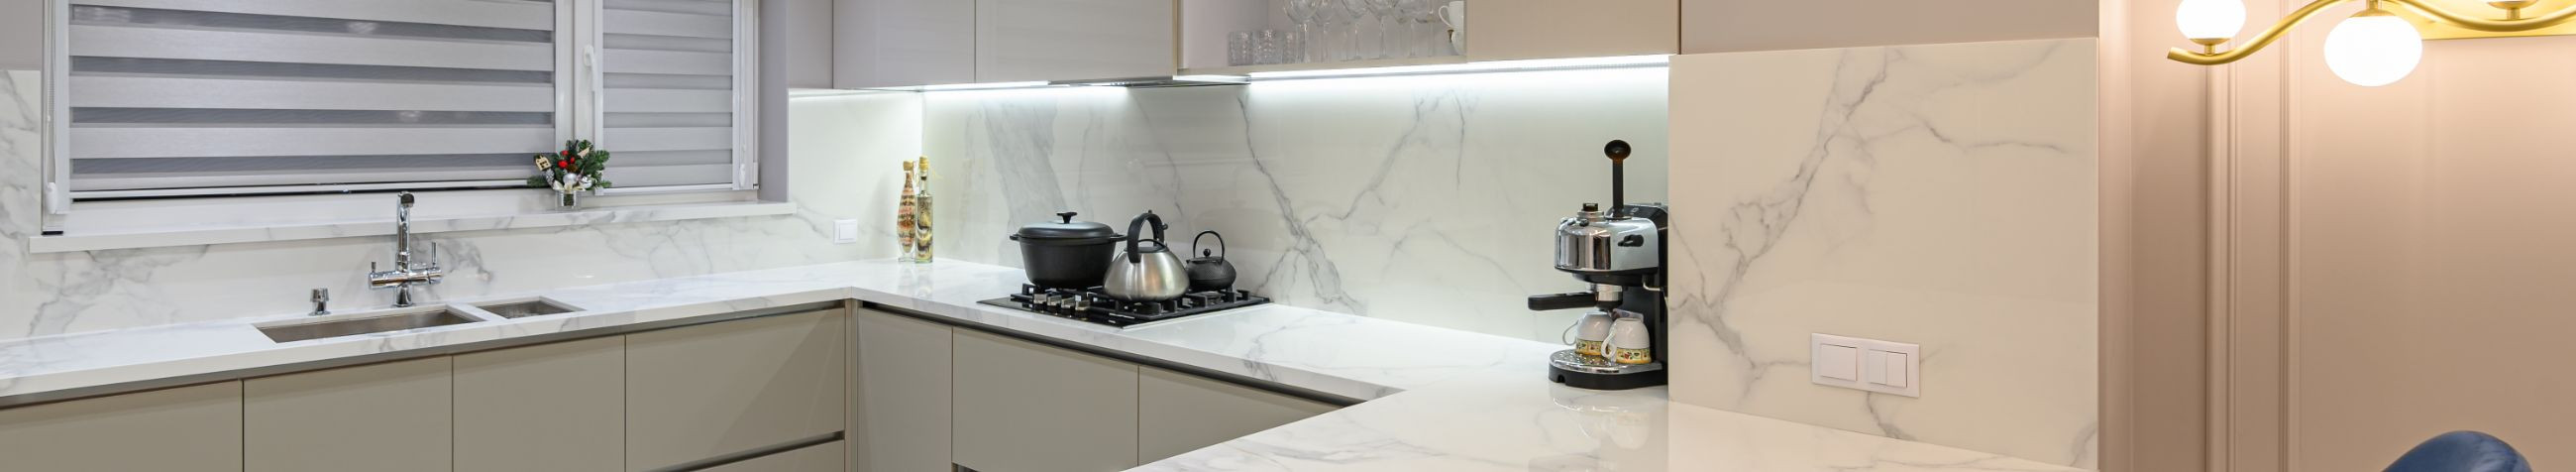 Quality Stone Worktops Your best choice for a quality worktop Get Your Quote Request A Callback Quality Stone Worktops Your best choice for a quality worktop Get Your Quote Request A Callback Granite Quartz Marble